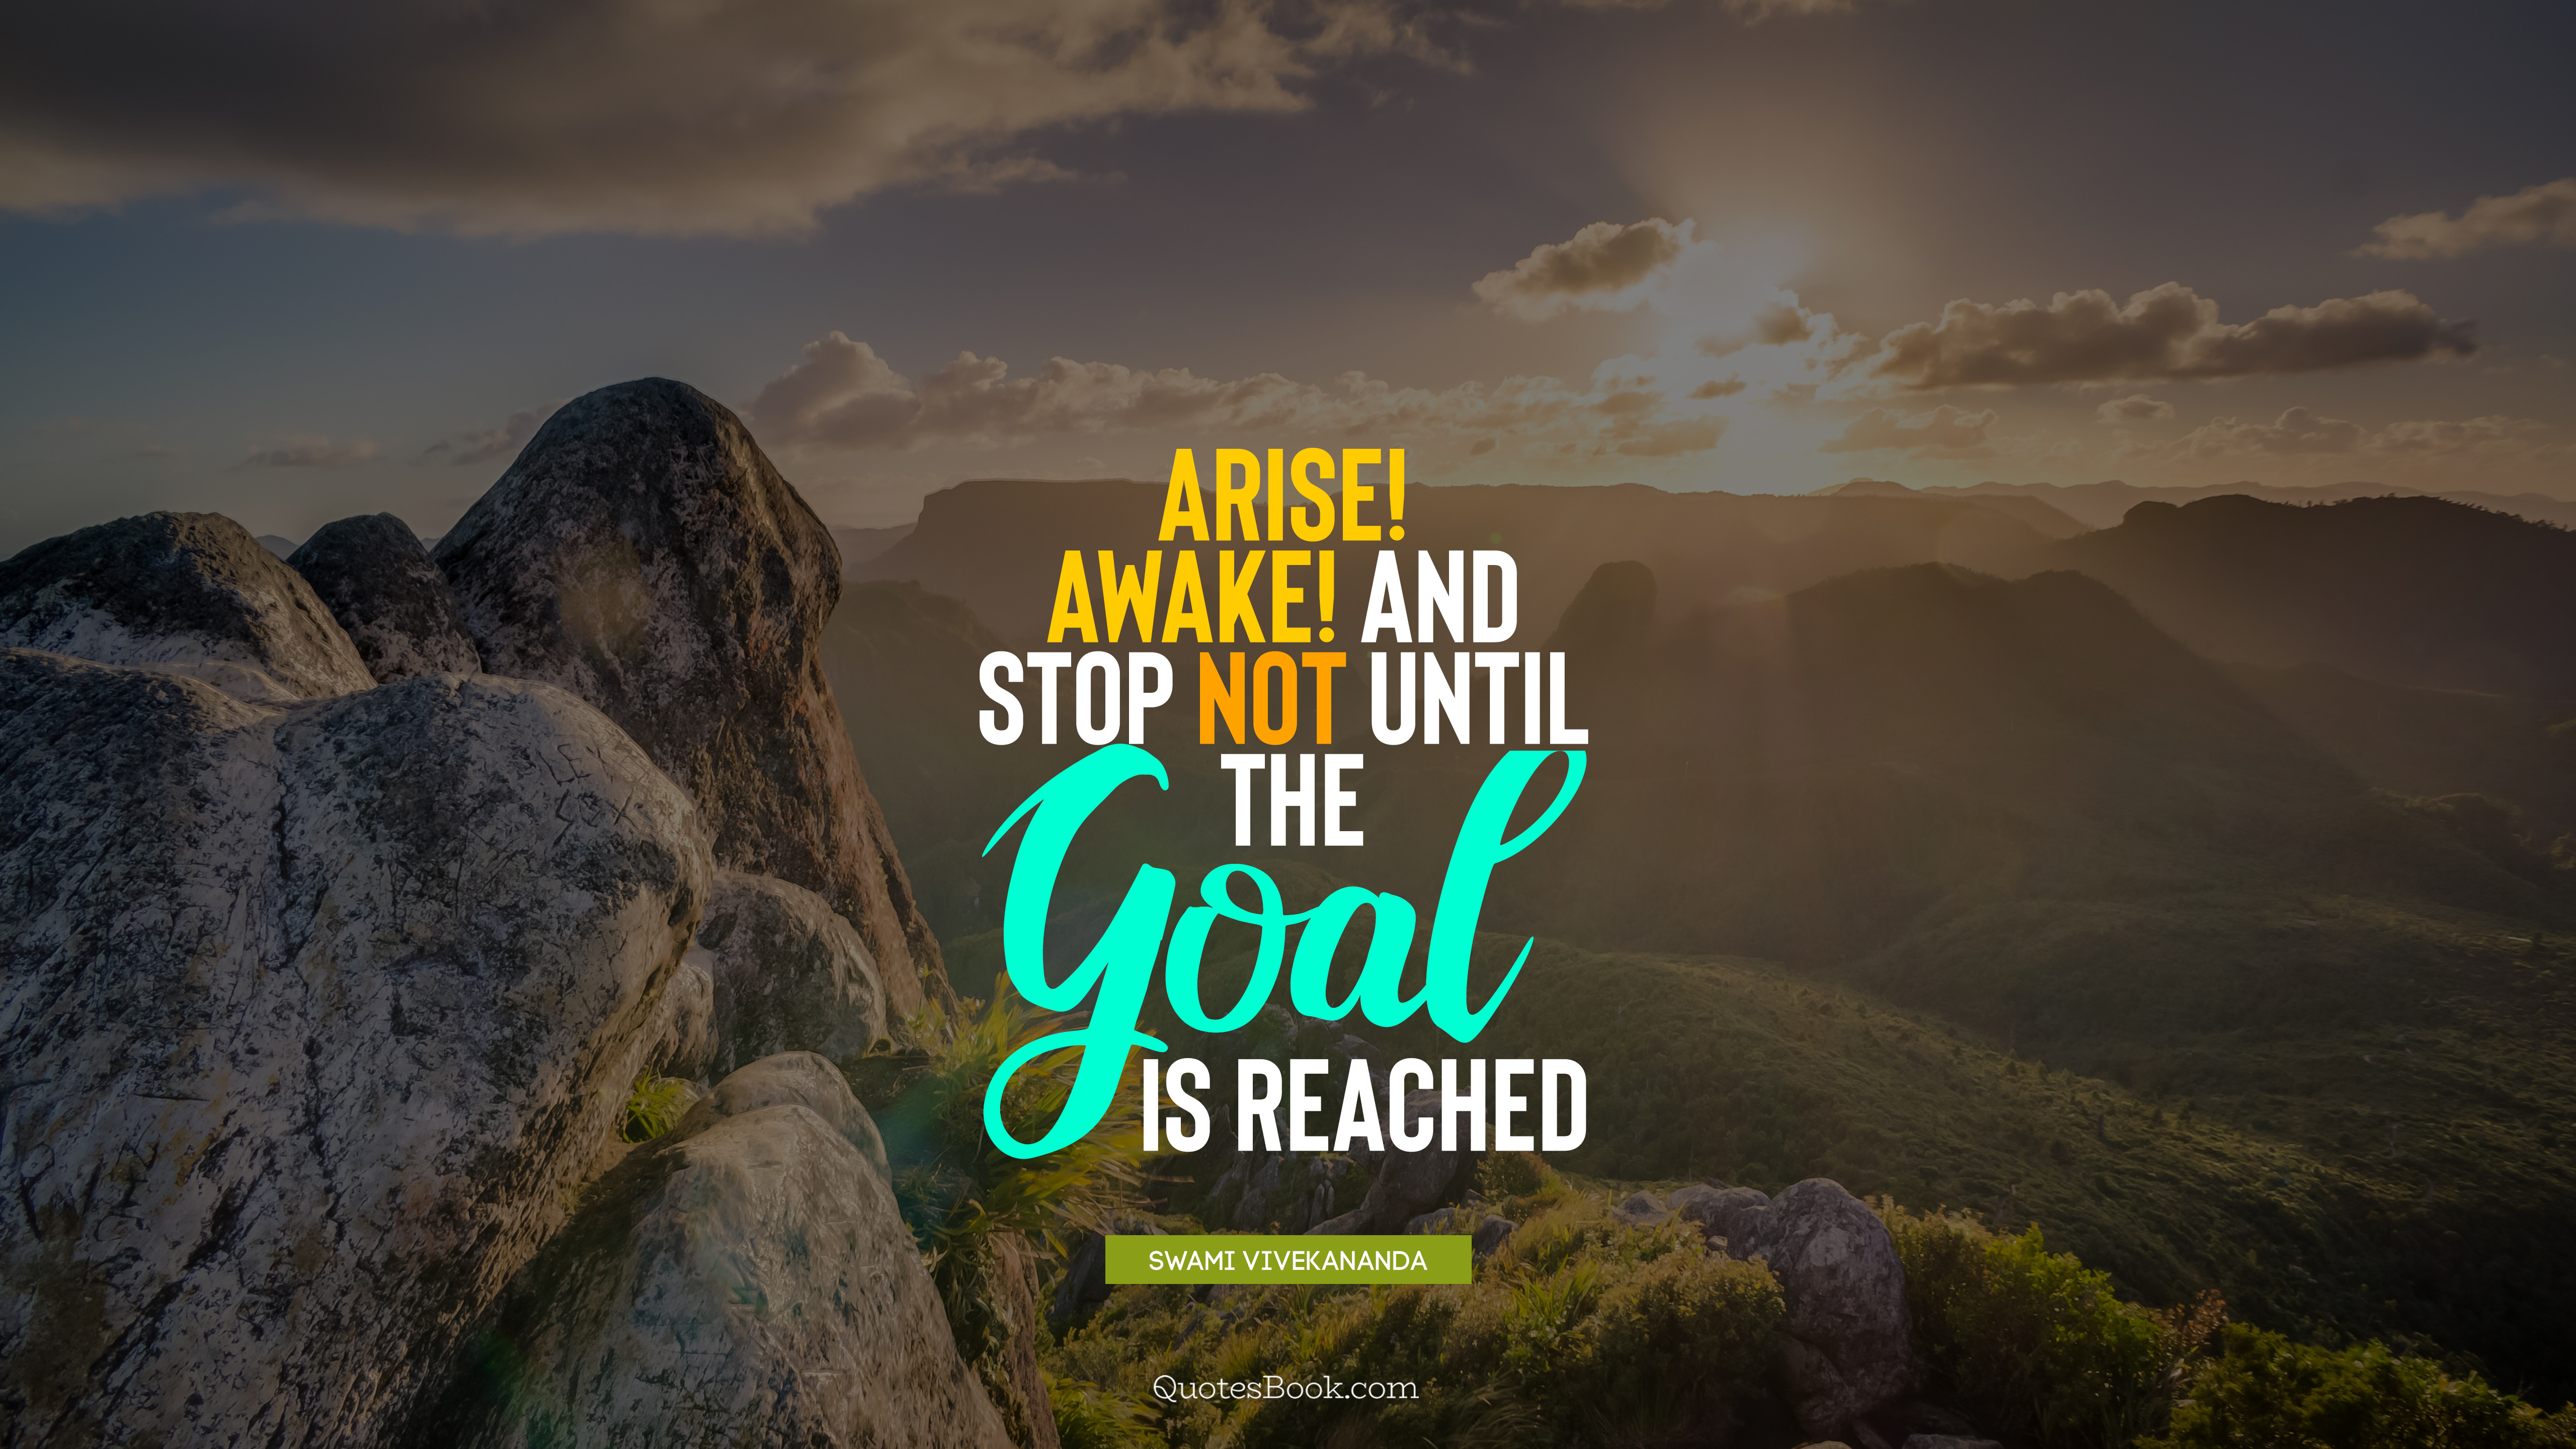 Arise! Awake! and stop not until the goal is reached. - Quote by Swami